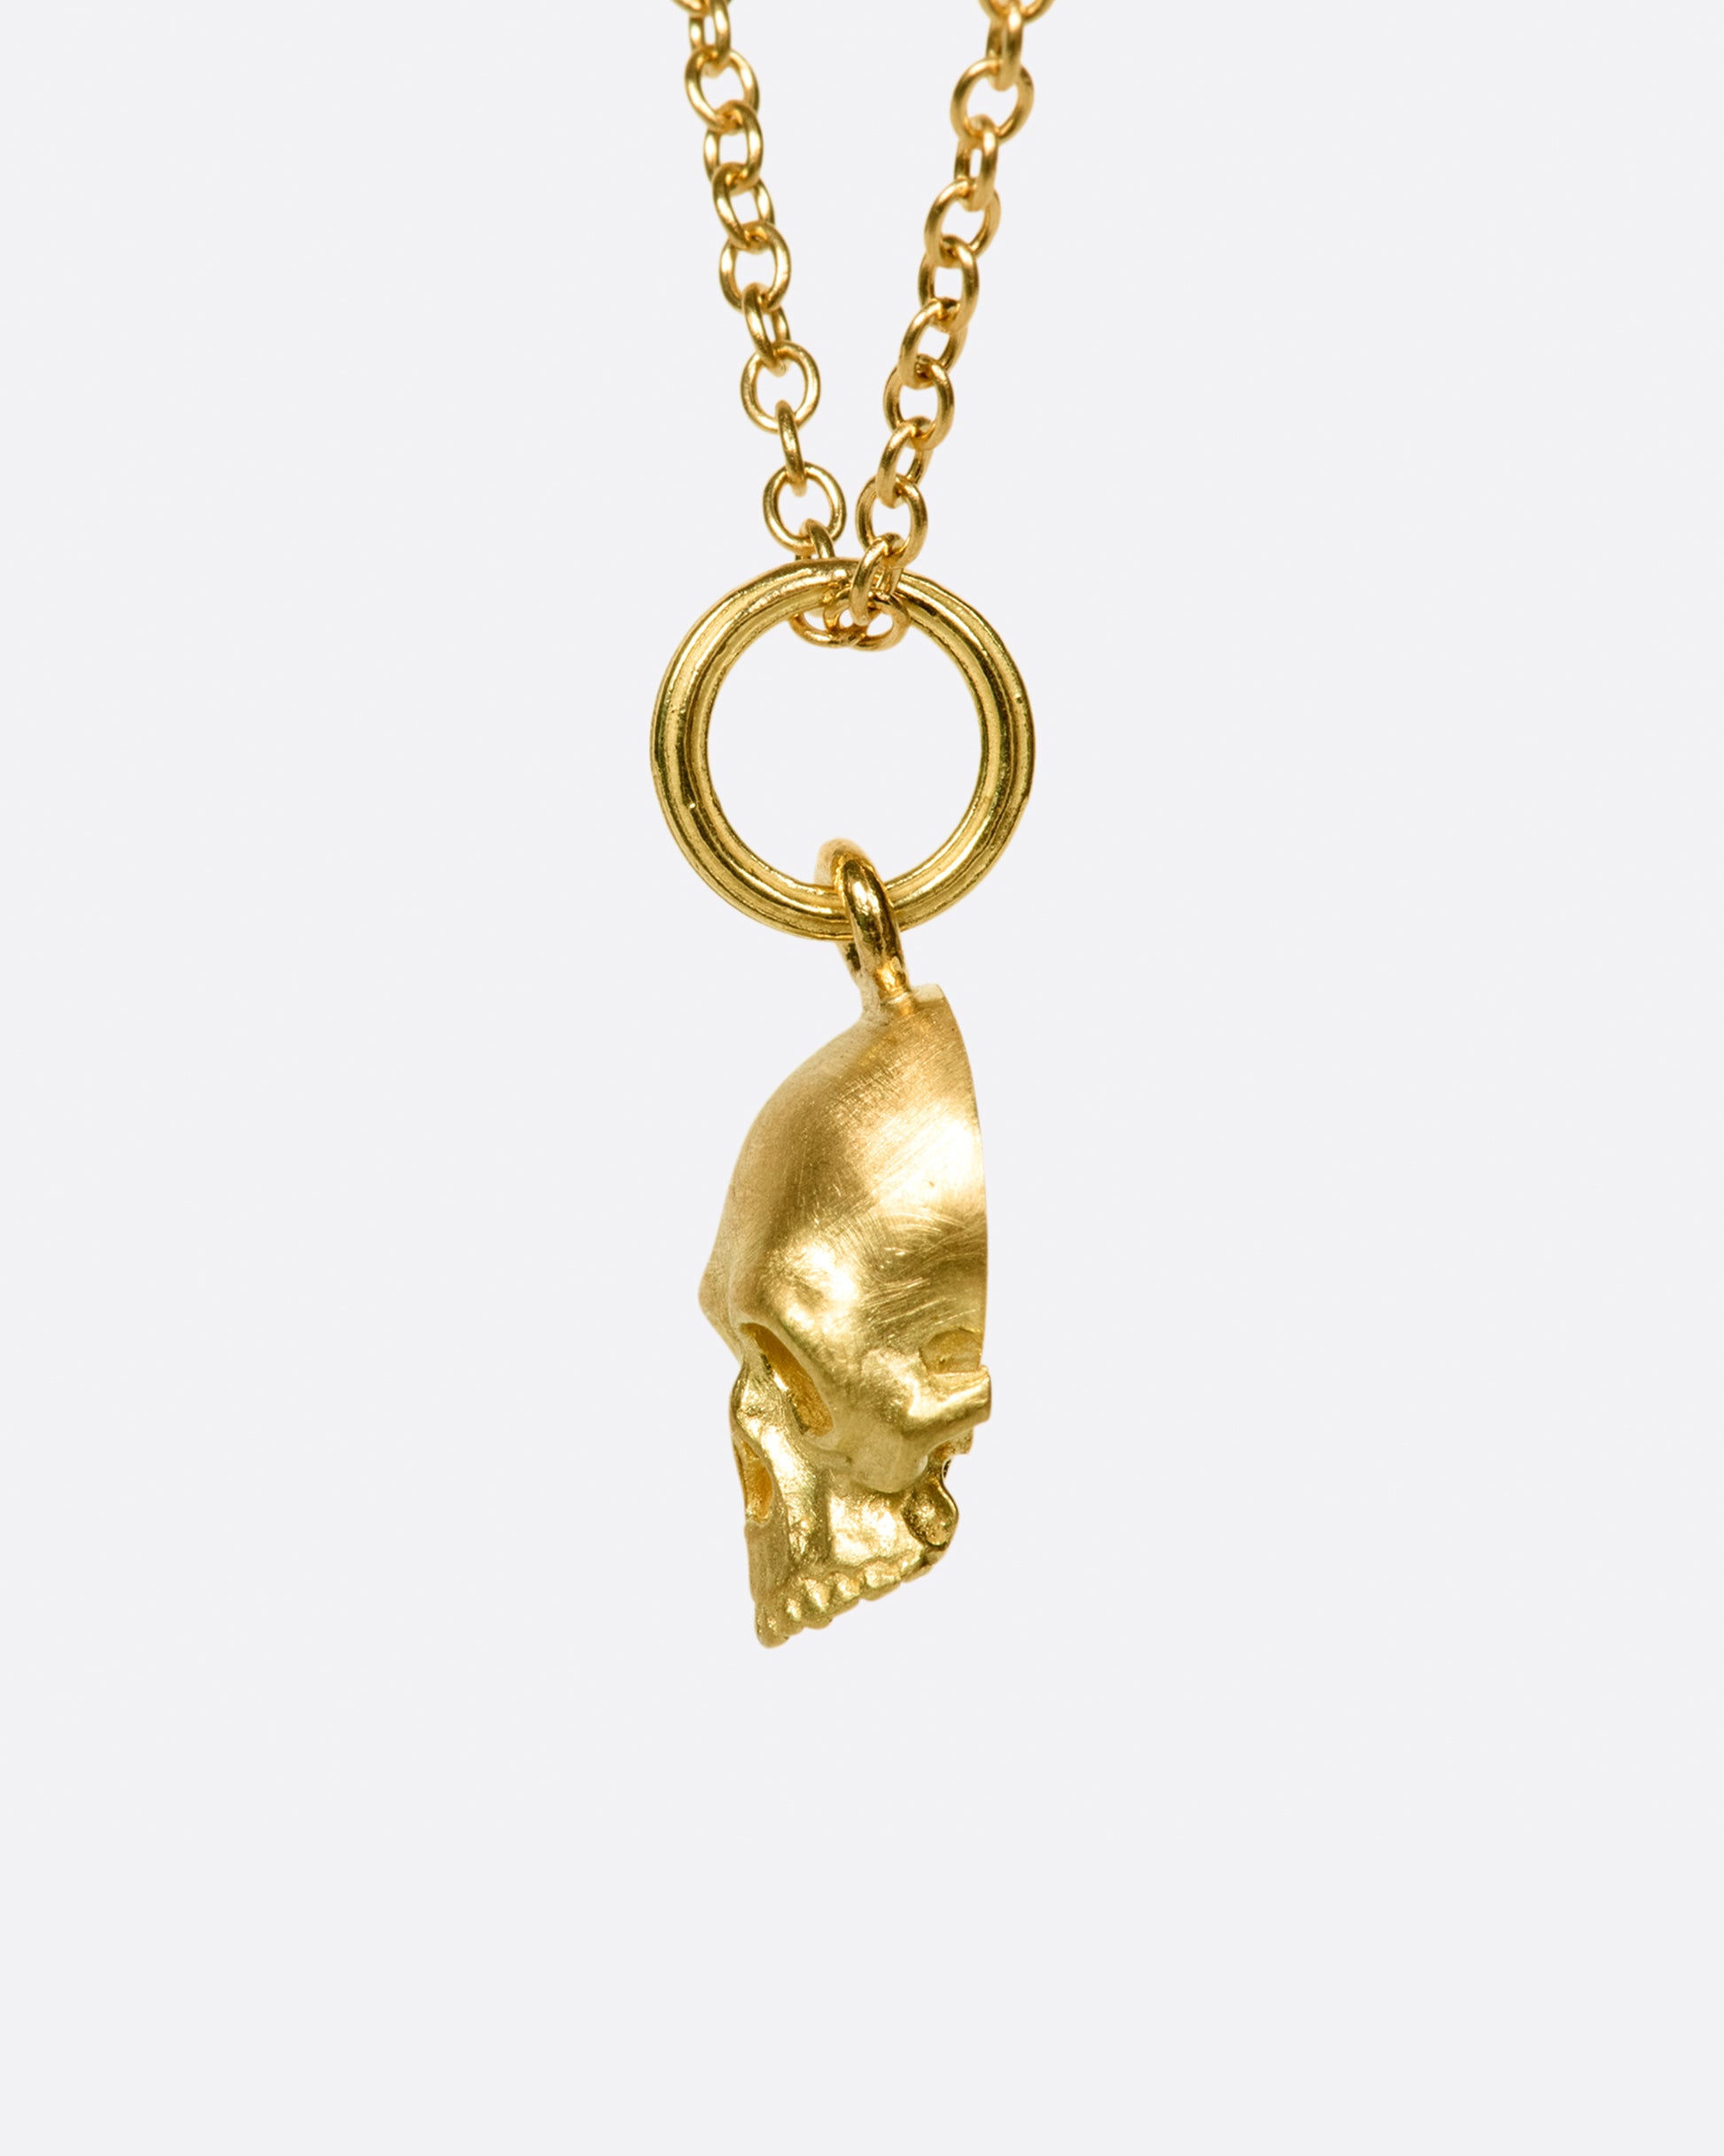 A cable chain necklace with a skull pendant based on the anatomical illustrations of Leonardo Da Vinci.